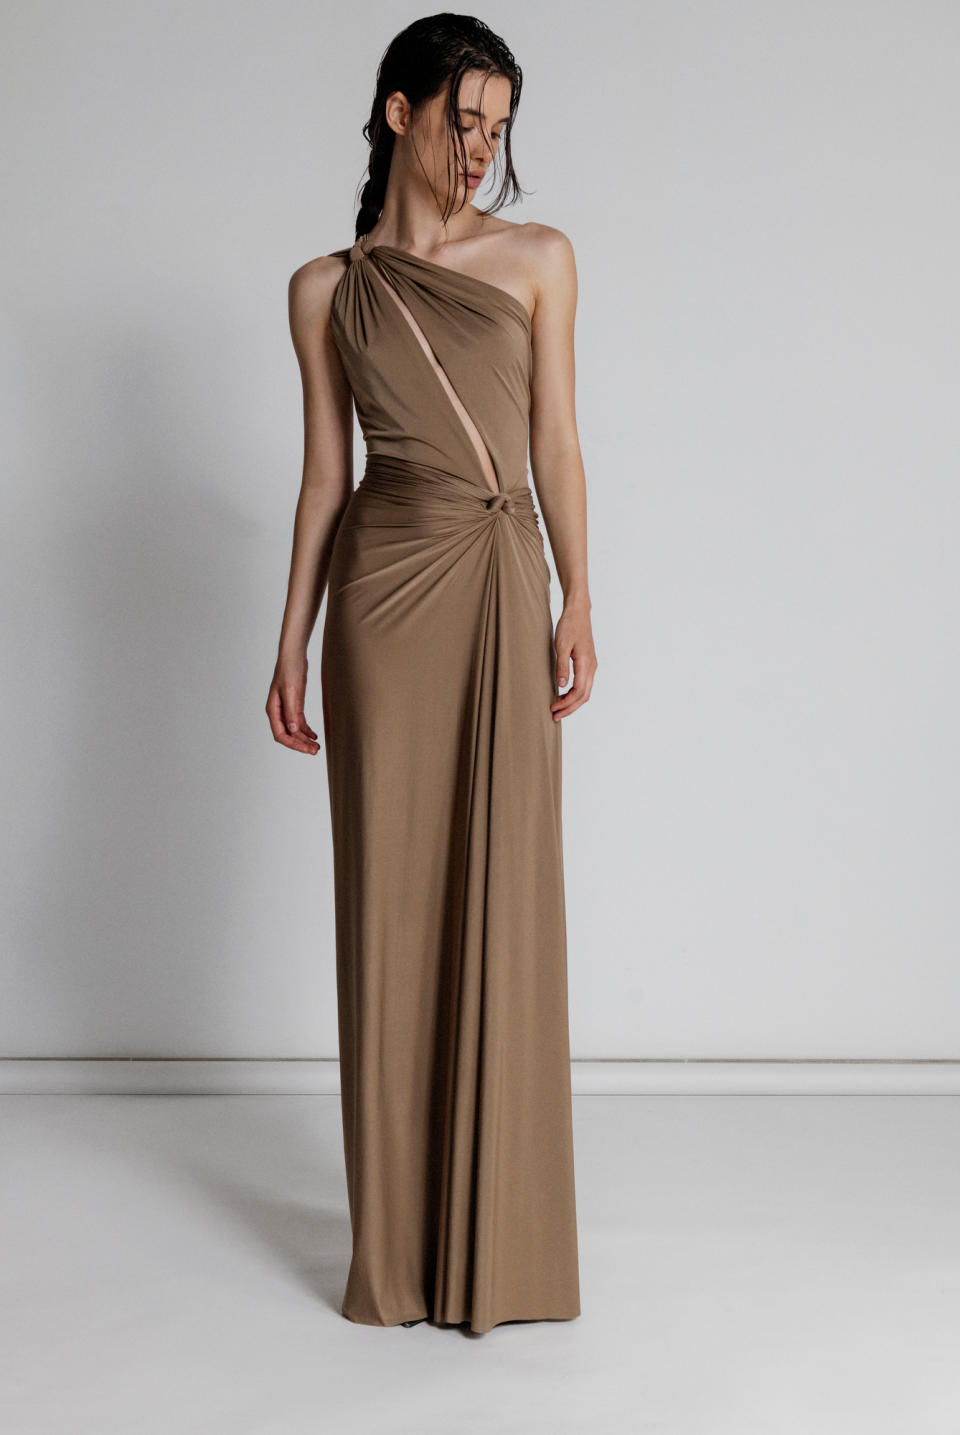 Balestra Resort 2025 Ready-to-Wear Collection